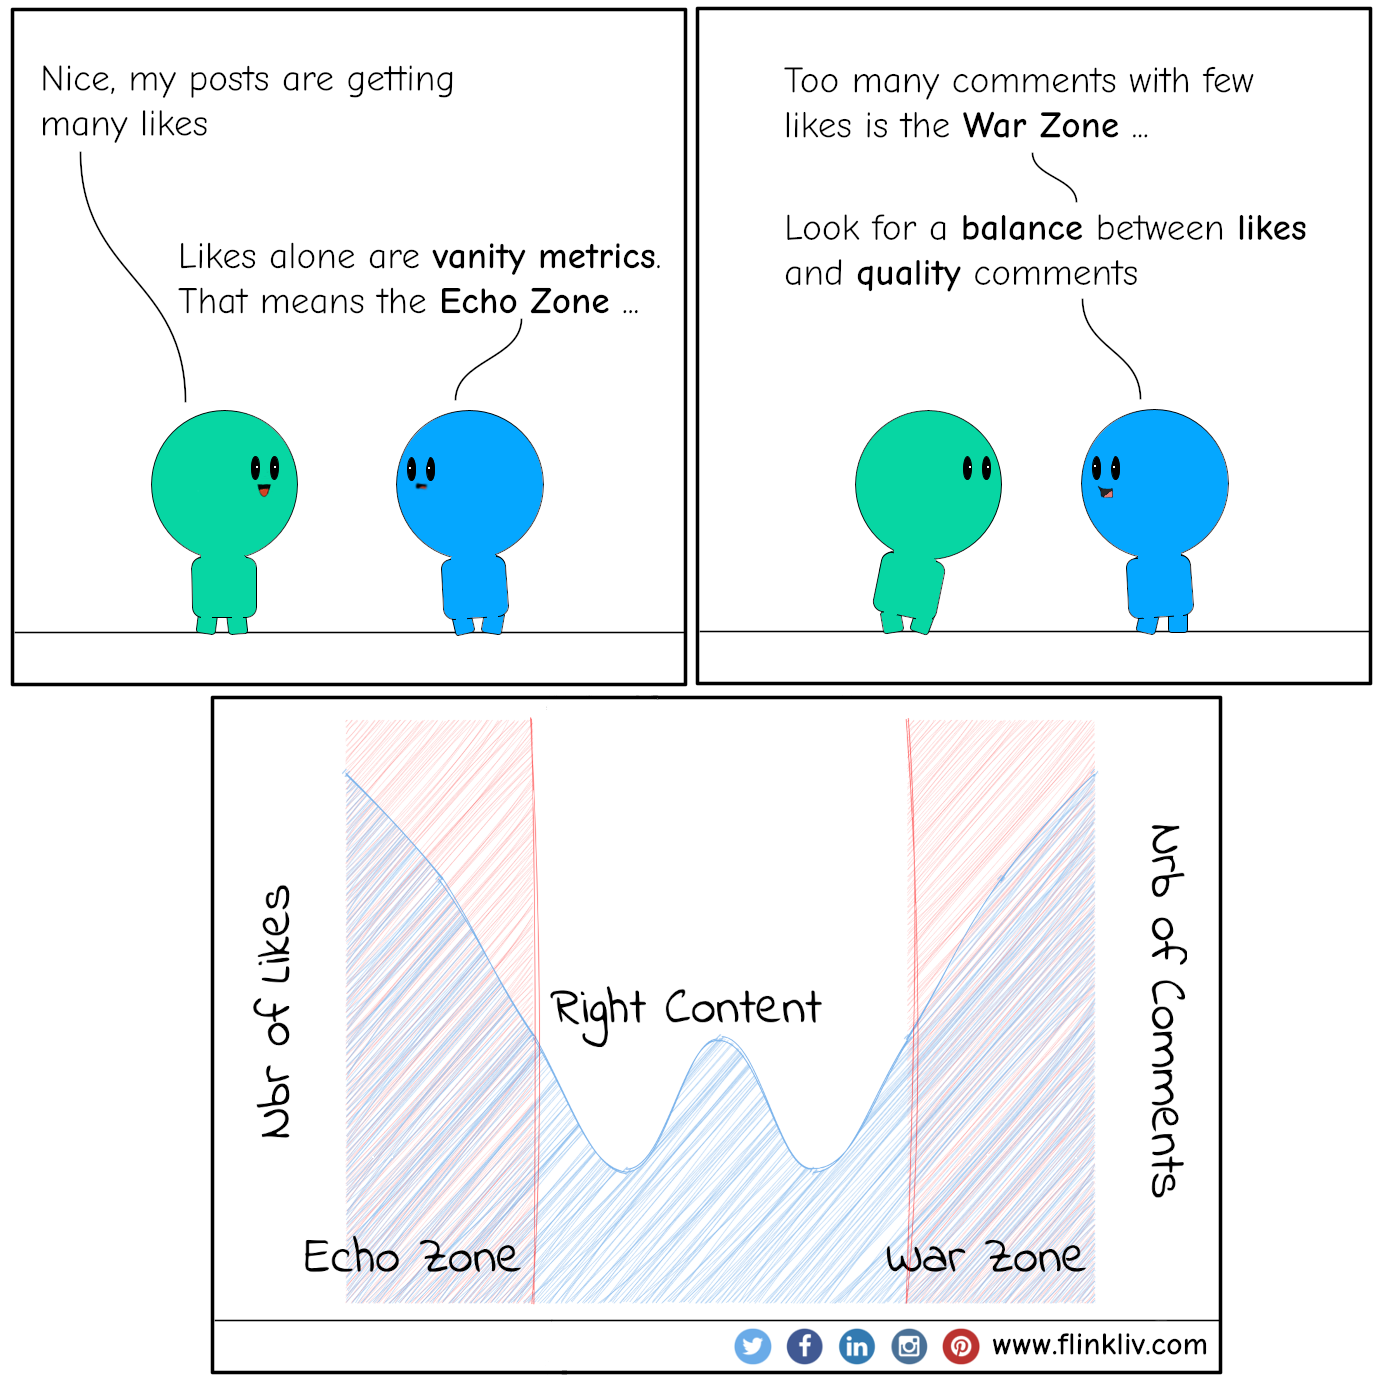 Conversation between A and B about vanity metrics.
          A: Nice, my posts are getting many likes.
          B: Likes alone are vanity metrics. That means the Echo Zone.           
          B:  Too many comments with few likes is the war zone. Look for a balance between likes and quality comments. 
          